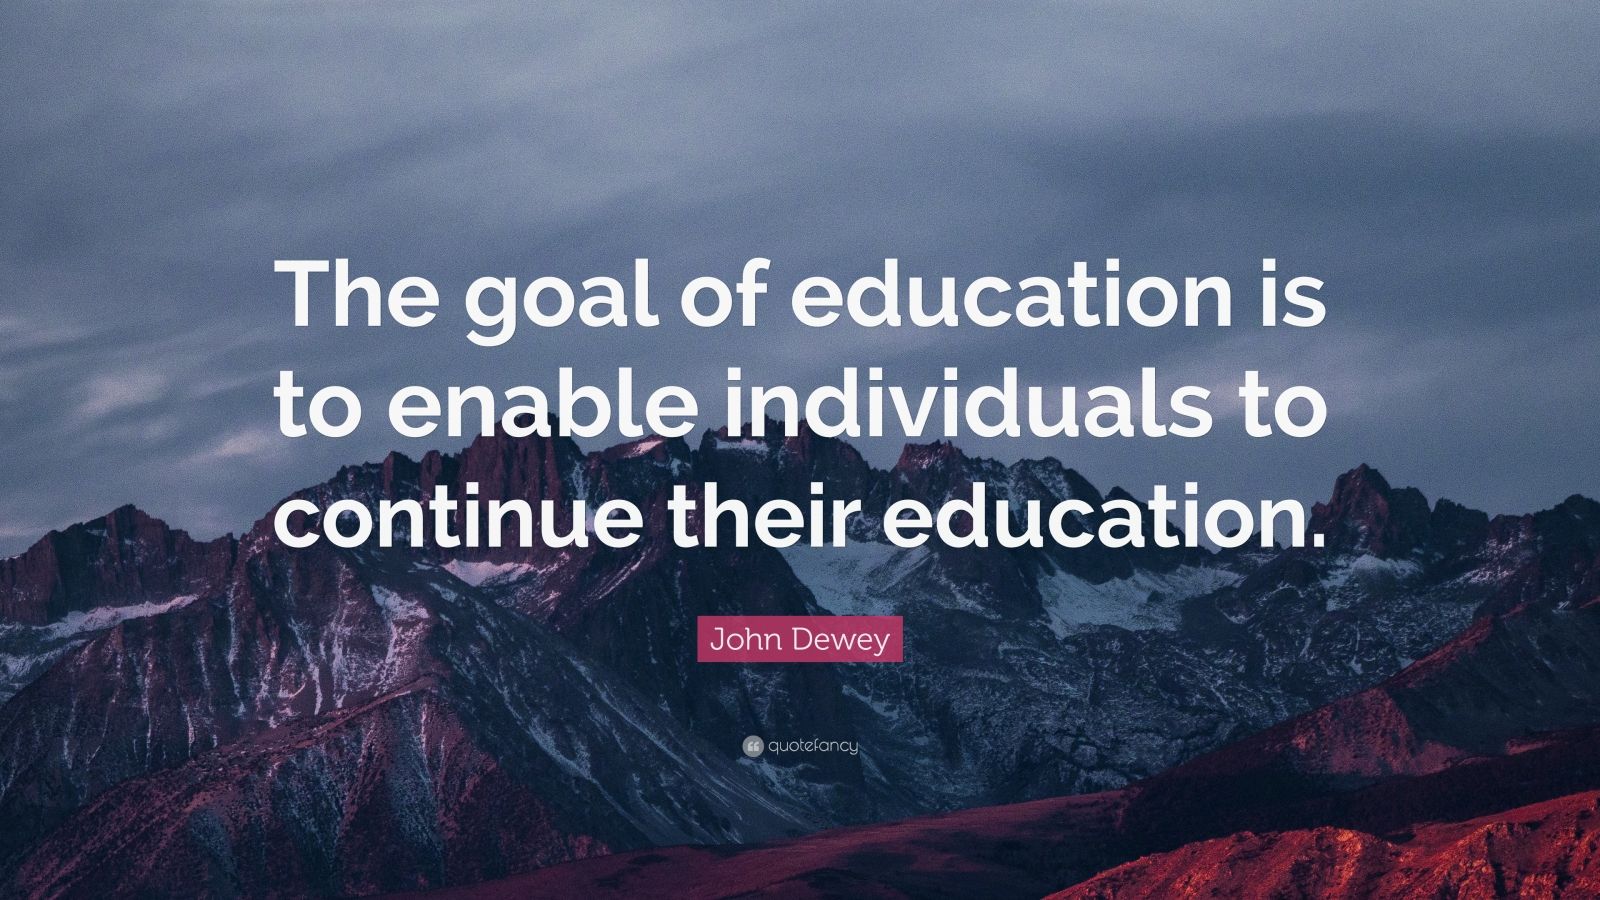 John Dewey Quote: “The goal of education is to enable individuals to ...